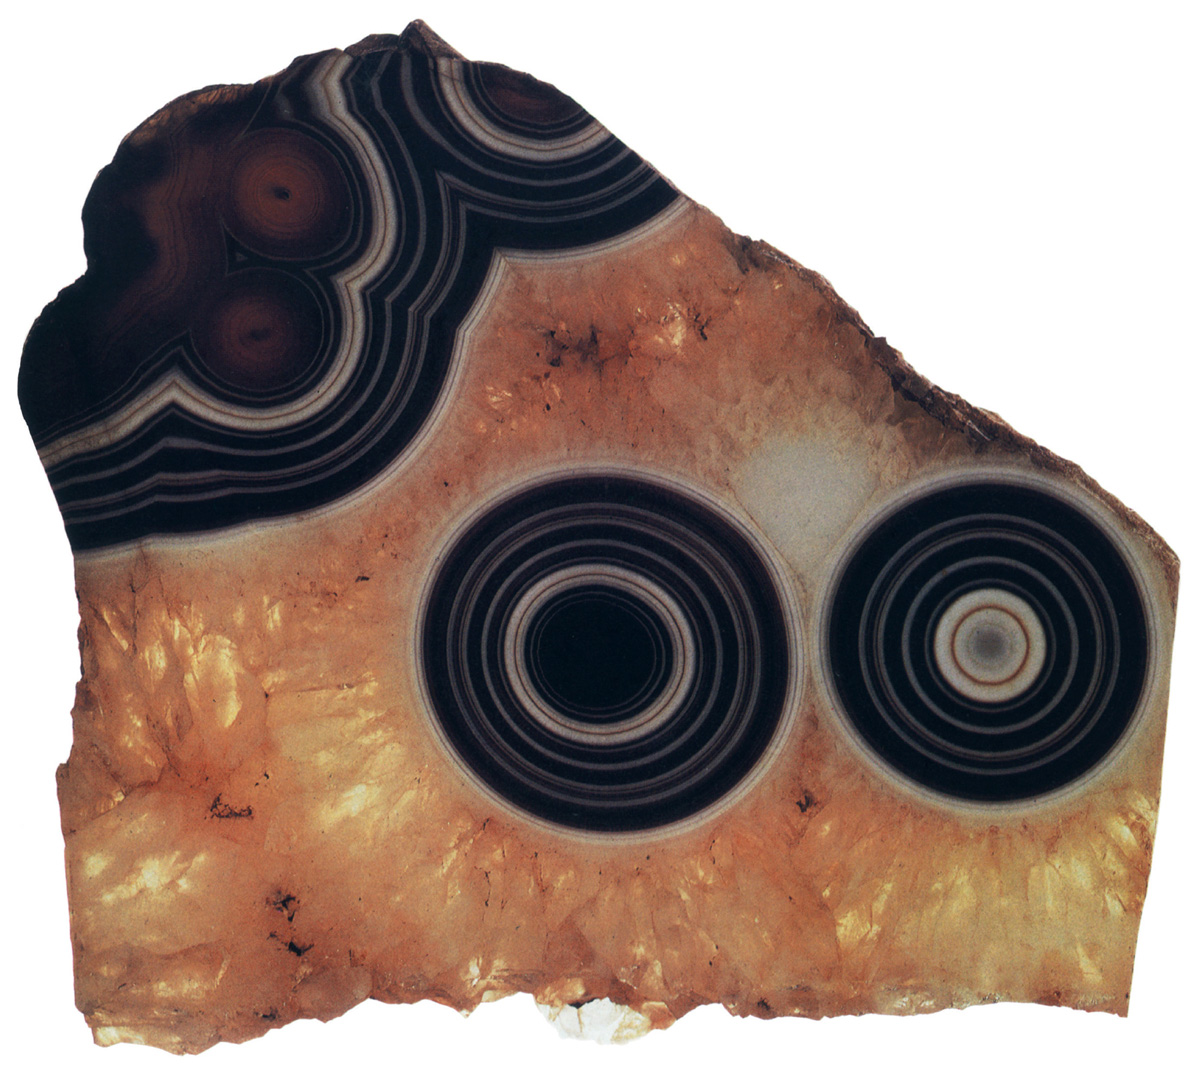 An eye agate from Uruguay. From the collection of Roger Caillois.